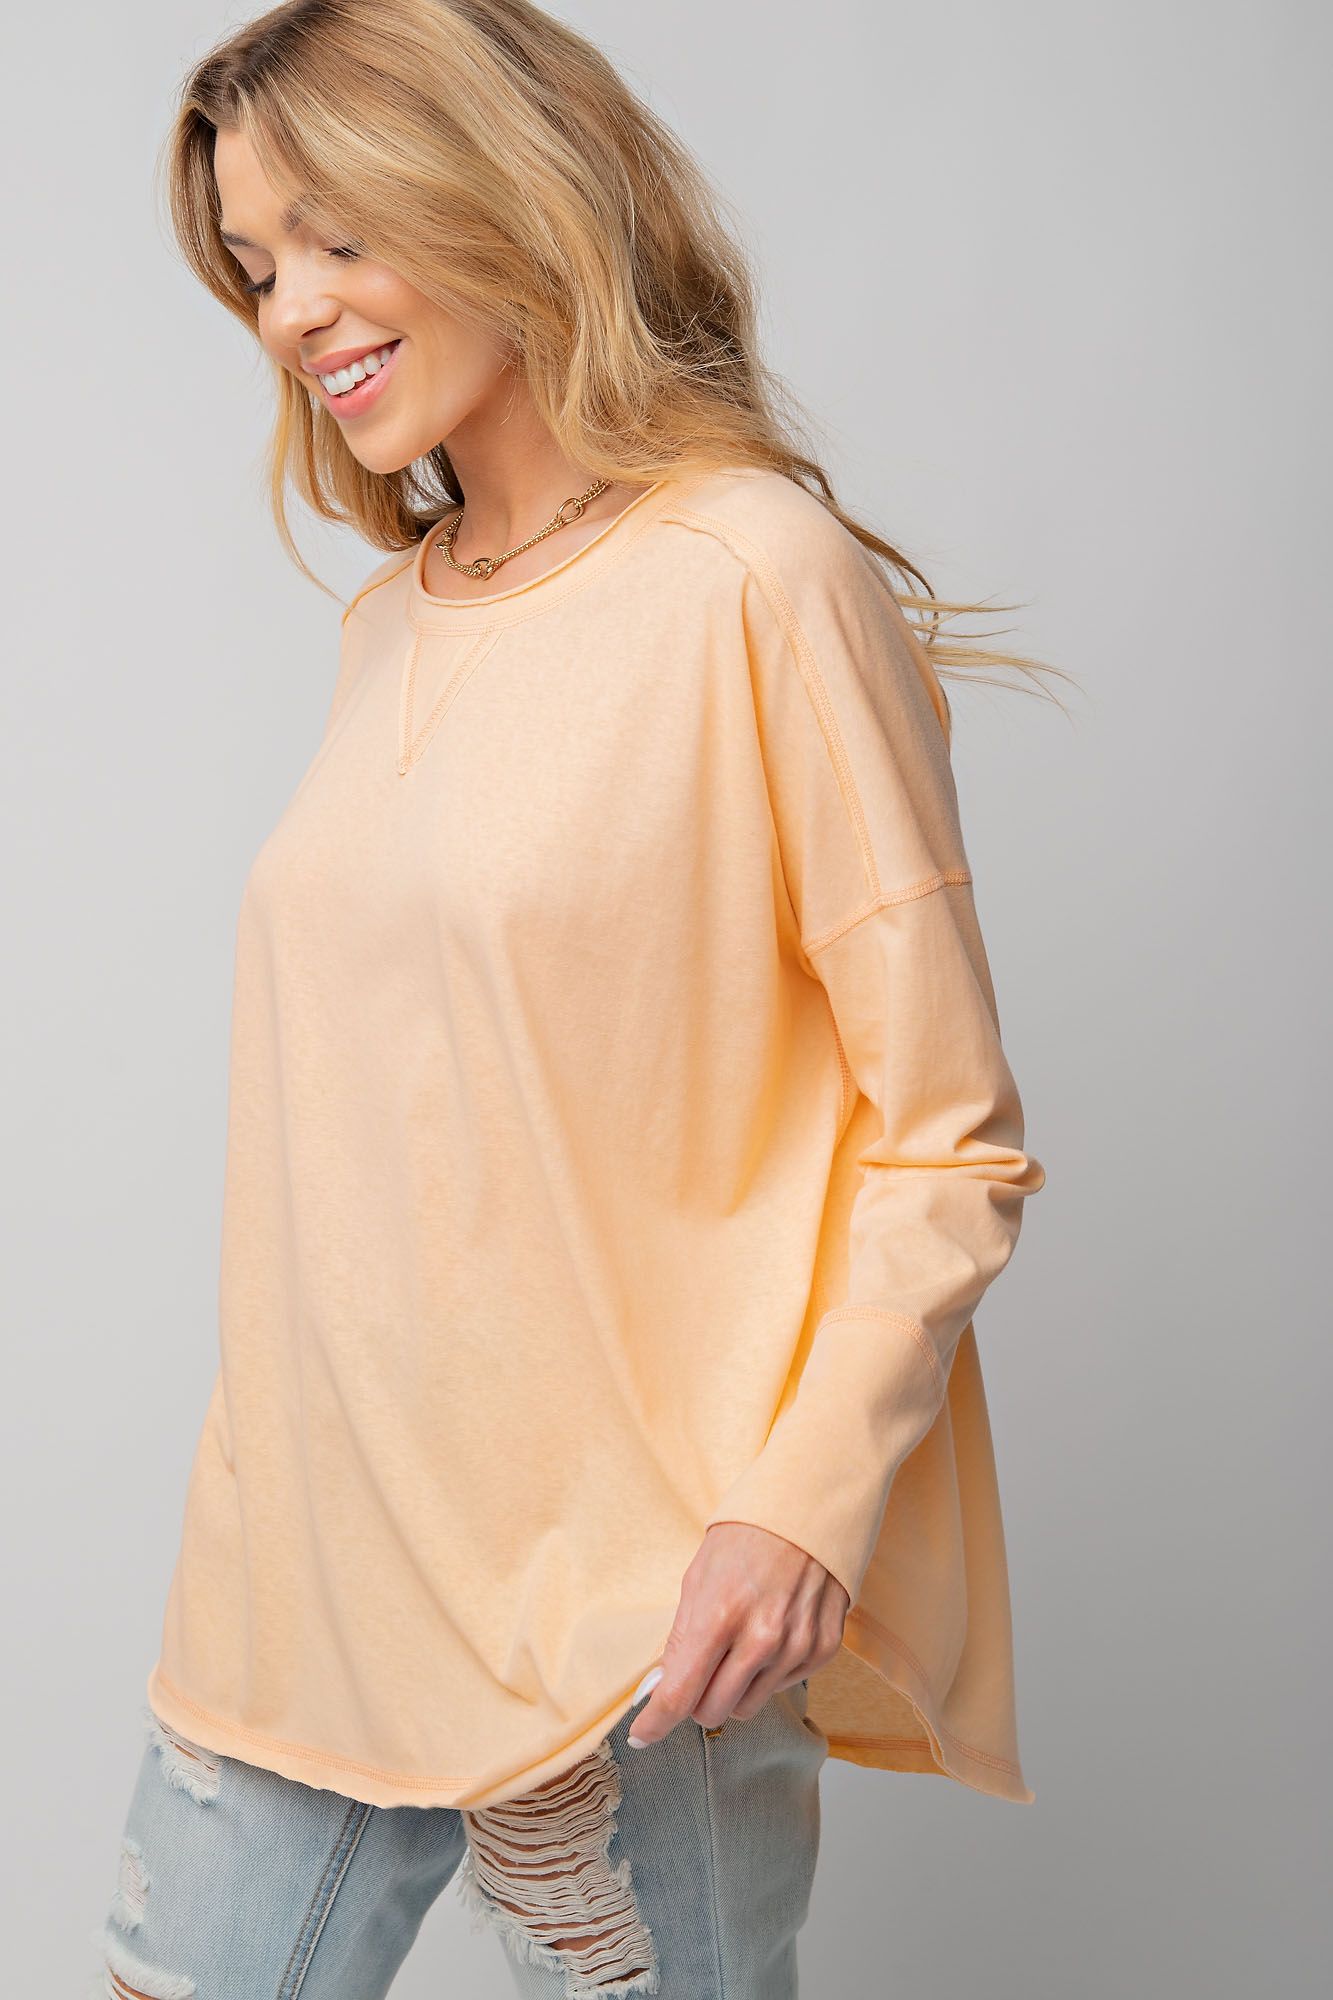 Easel Cotton Jersey Exposed Seam Raw Double Hem Loose Fit Tunic Top - Roulhac Fashion Boutique